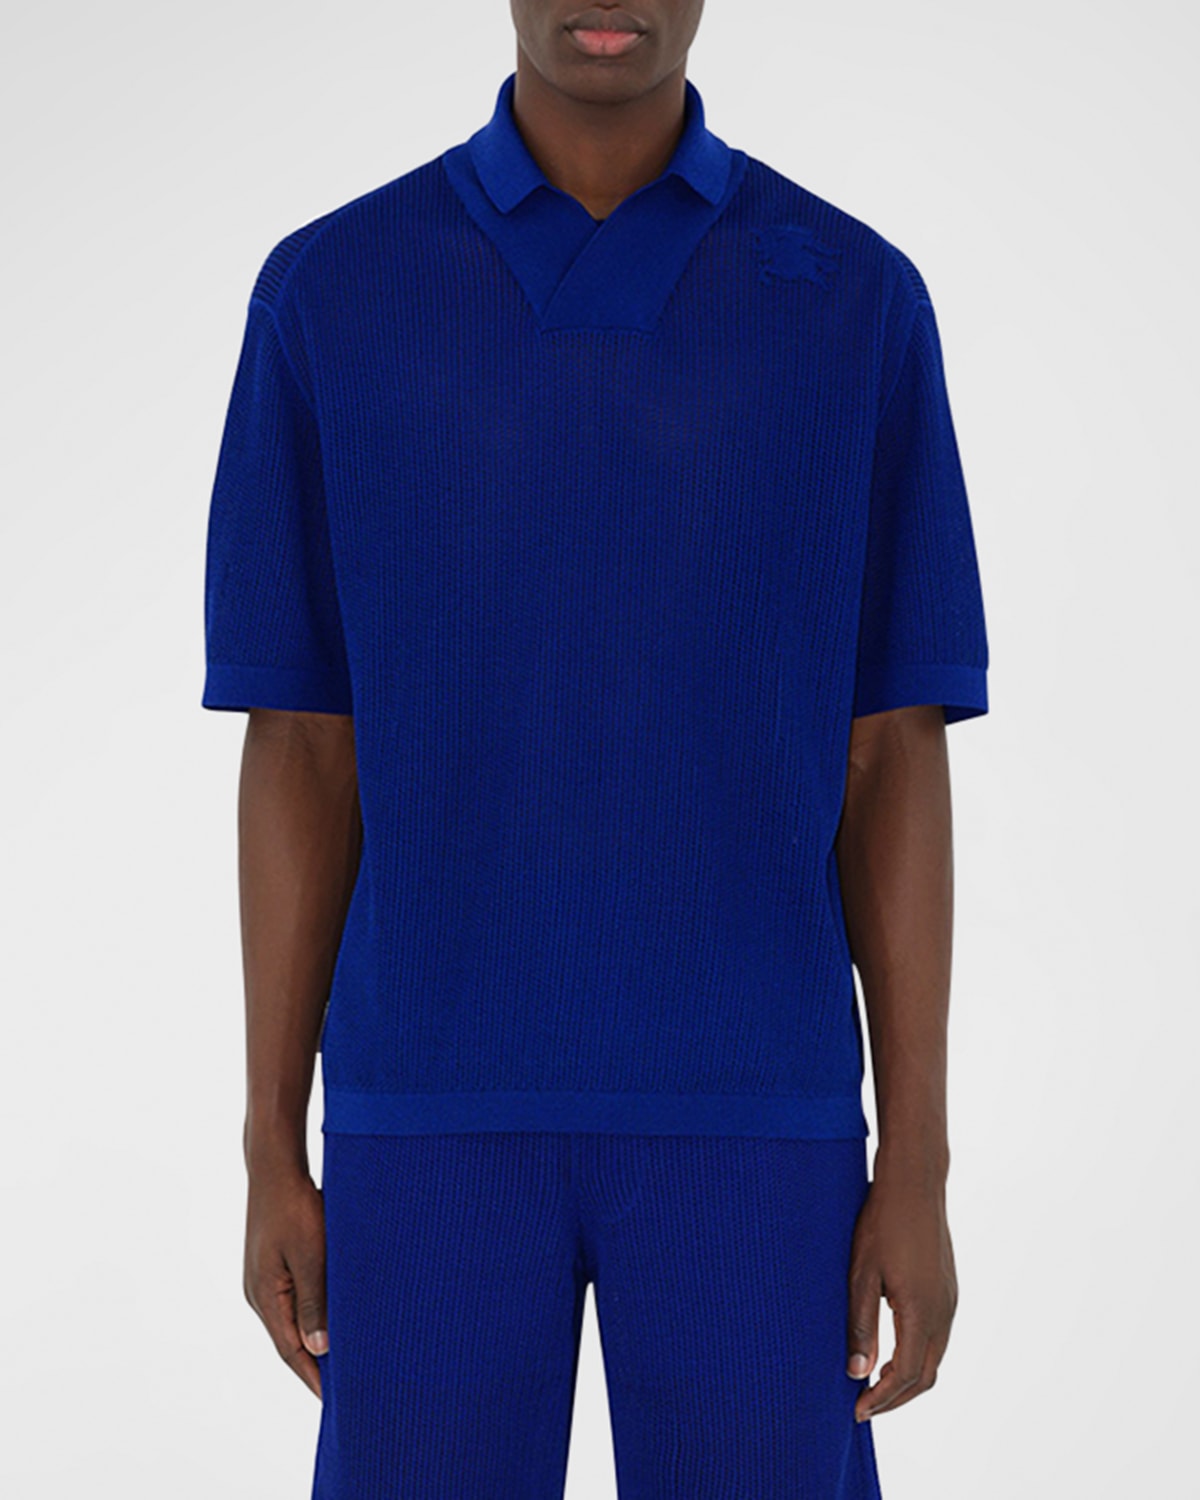 Burberry Men's Mesh Knit Polo Shirt In Knight